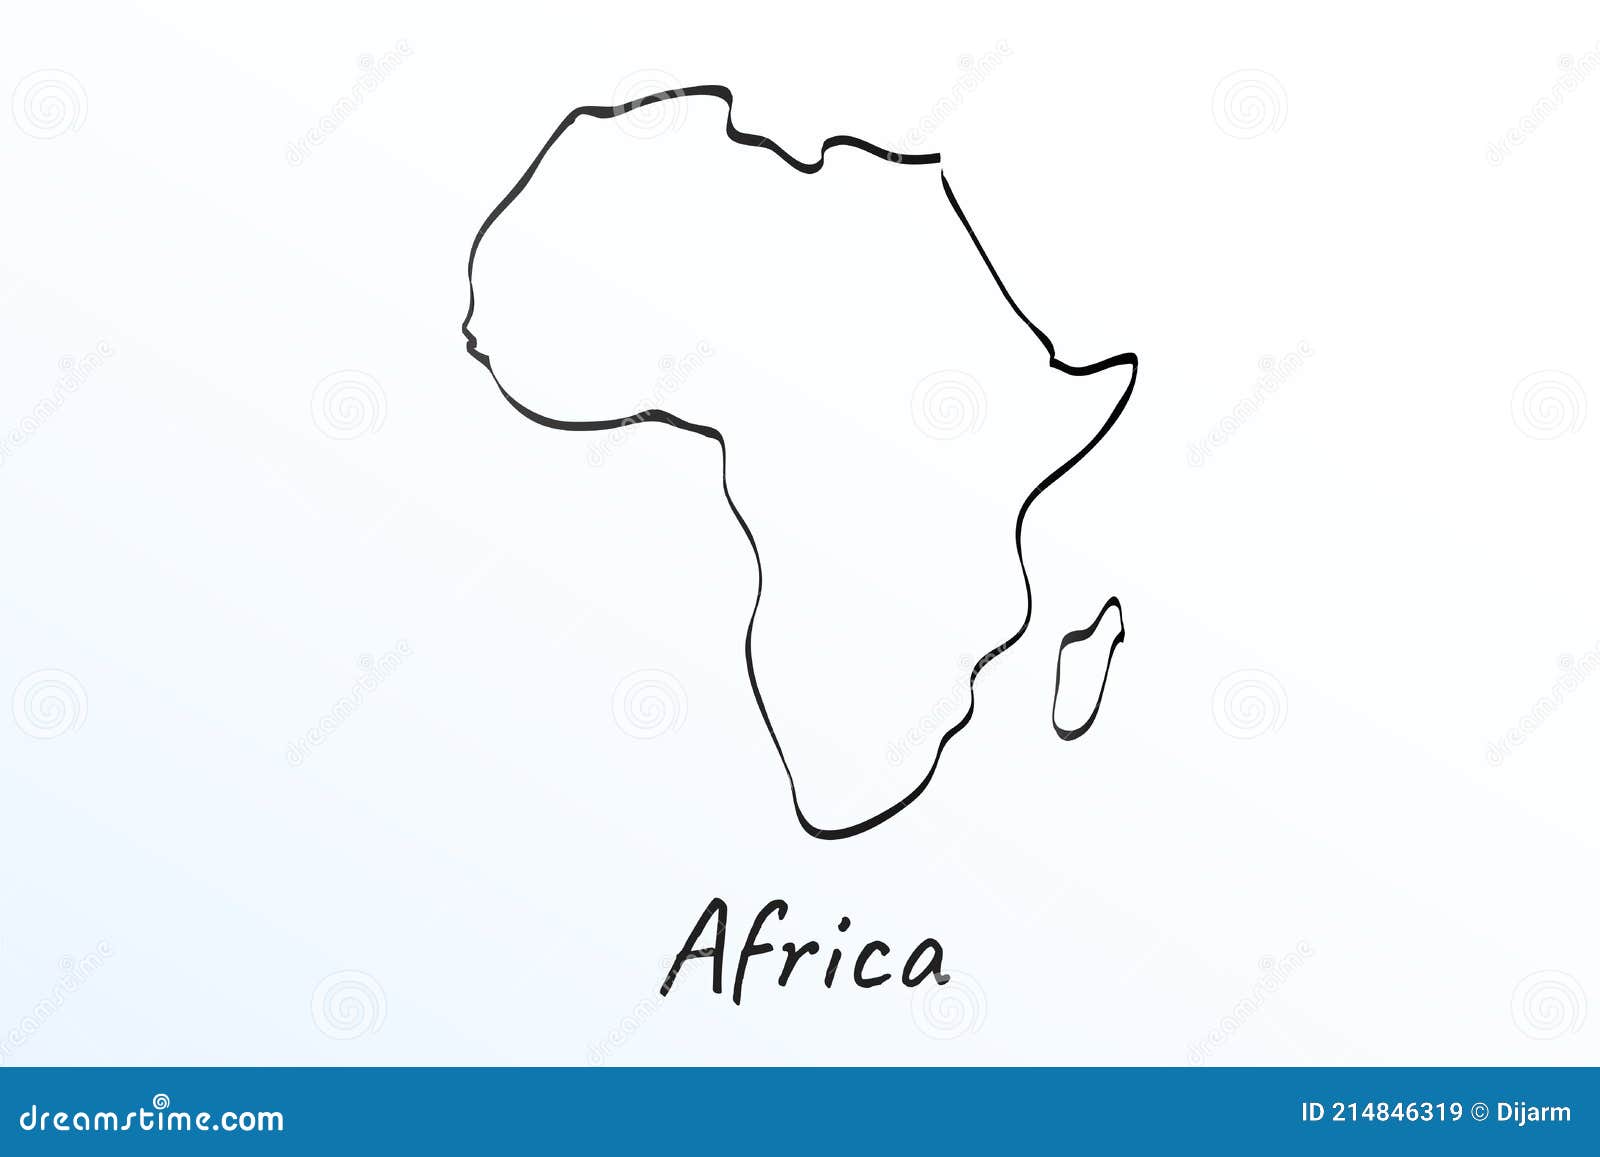 How To Draw Africa Map / Transparent Africa Map Png South Africa Map